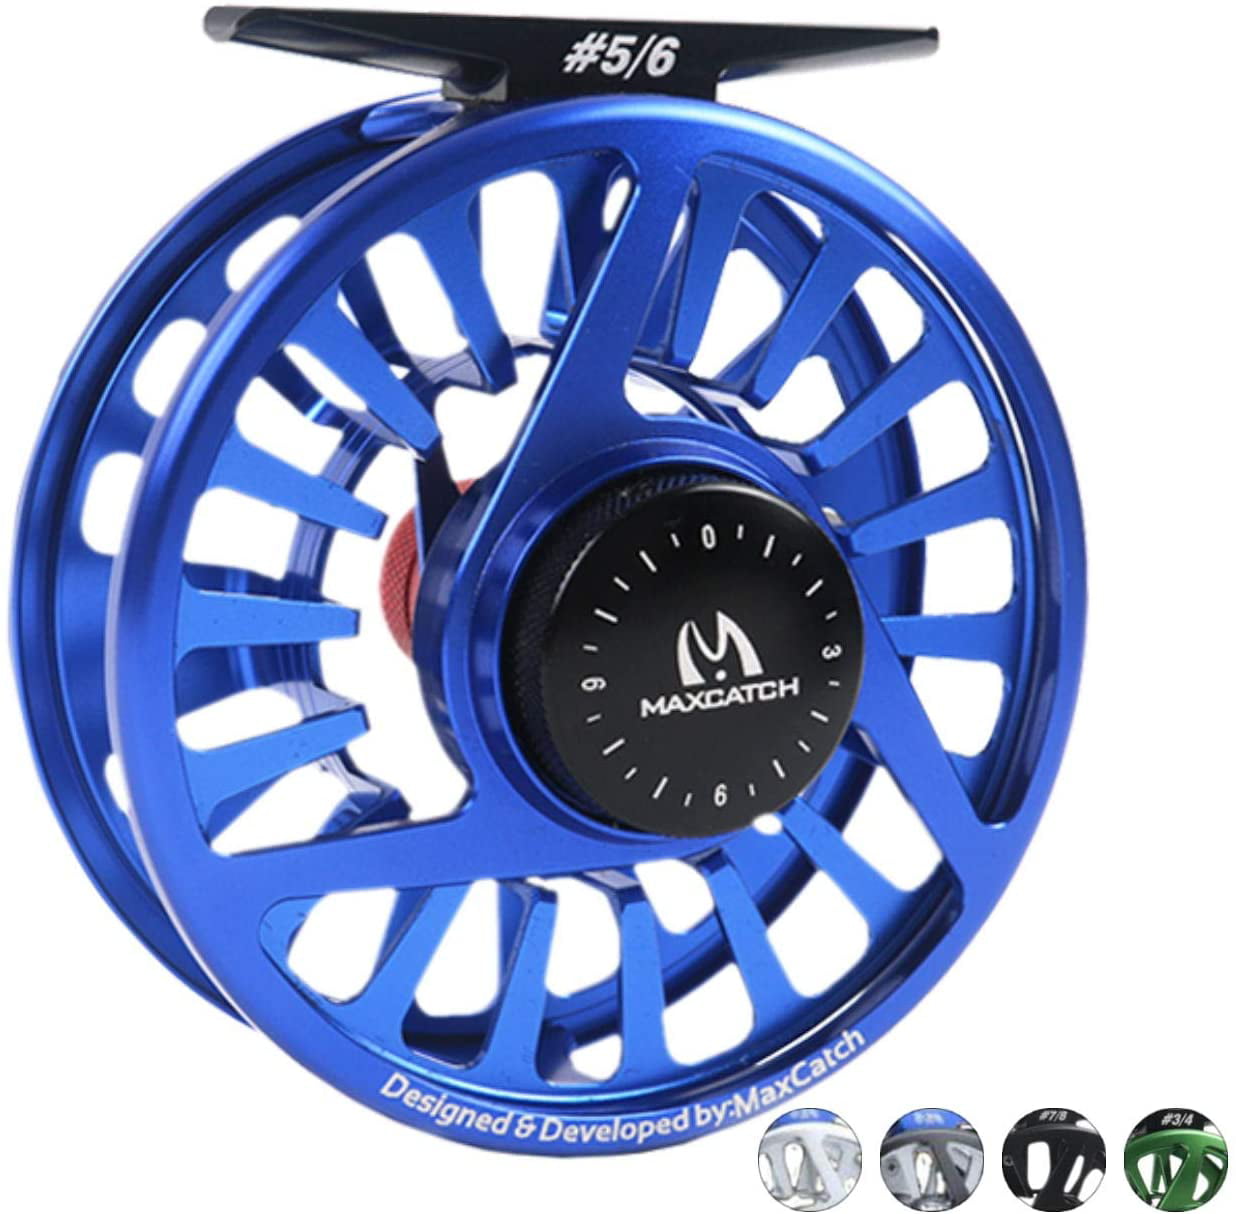 Maxcatch Waterproof 5/6WT Super Light Aluminum Fly Reel Exclusive CNC Machined 